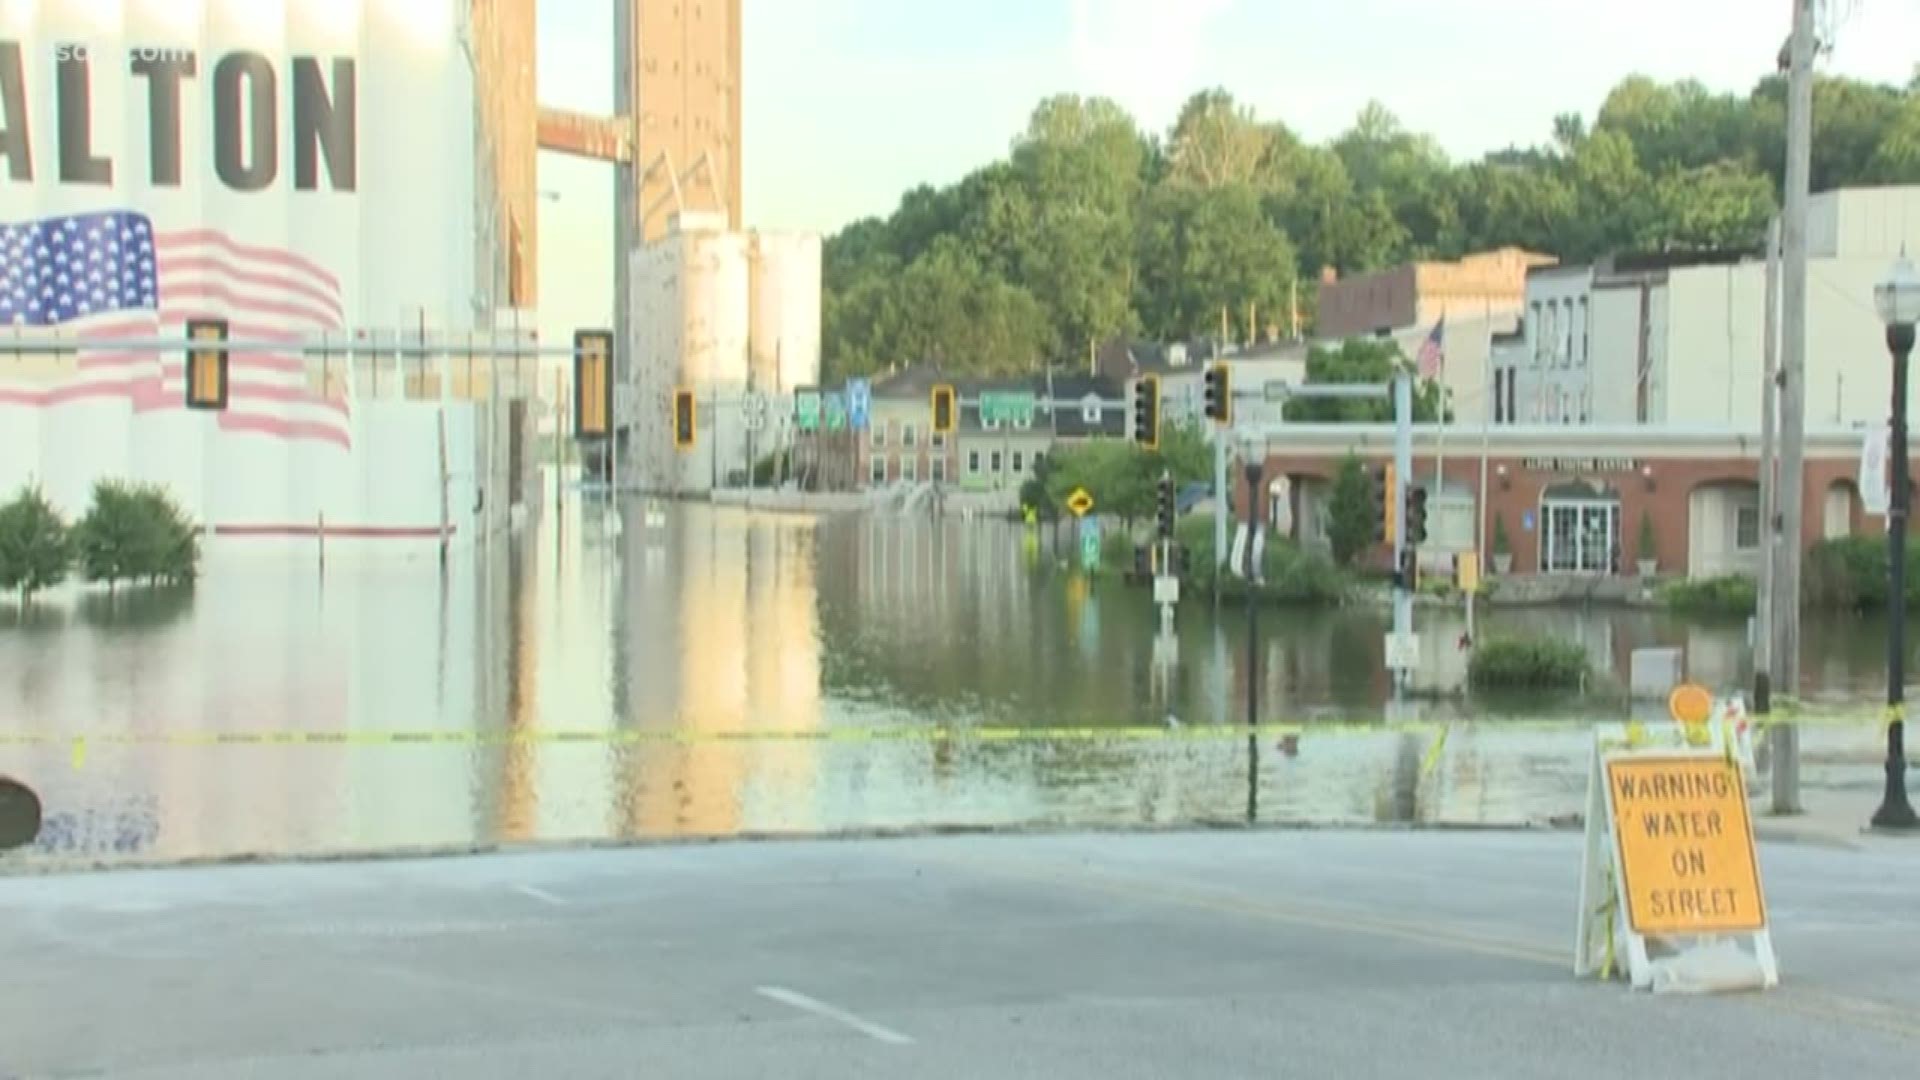 Mississippi River levels are dropping, so crews have gotten the go-ahead to open the floodgates in Alton. The area has seen near-record flooding this spring.